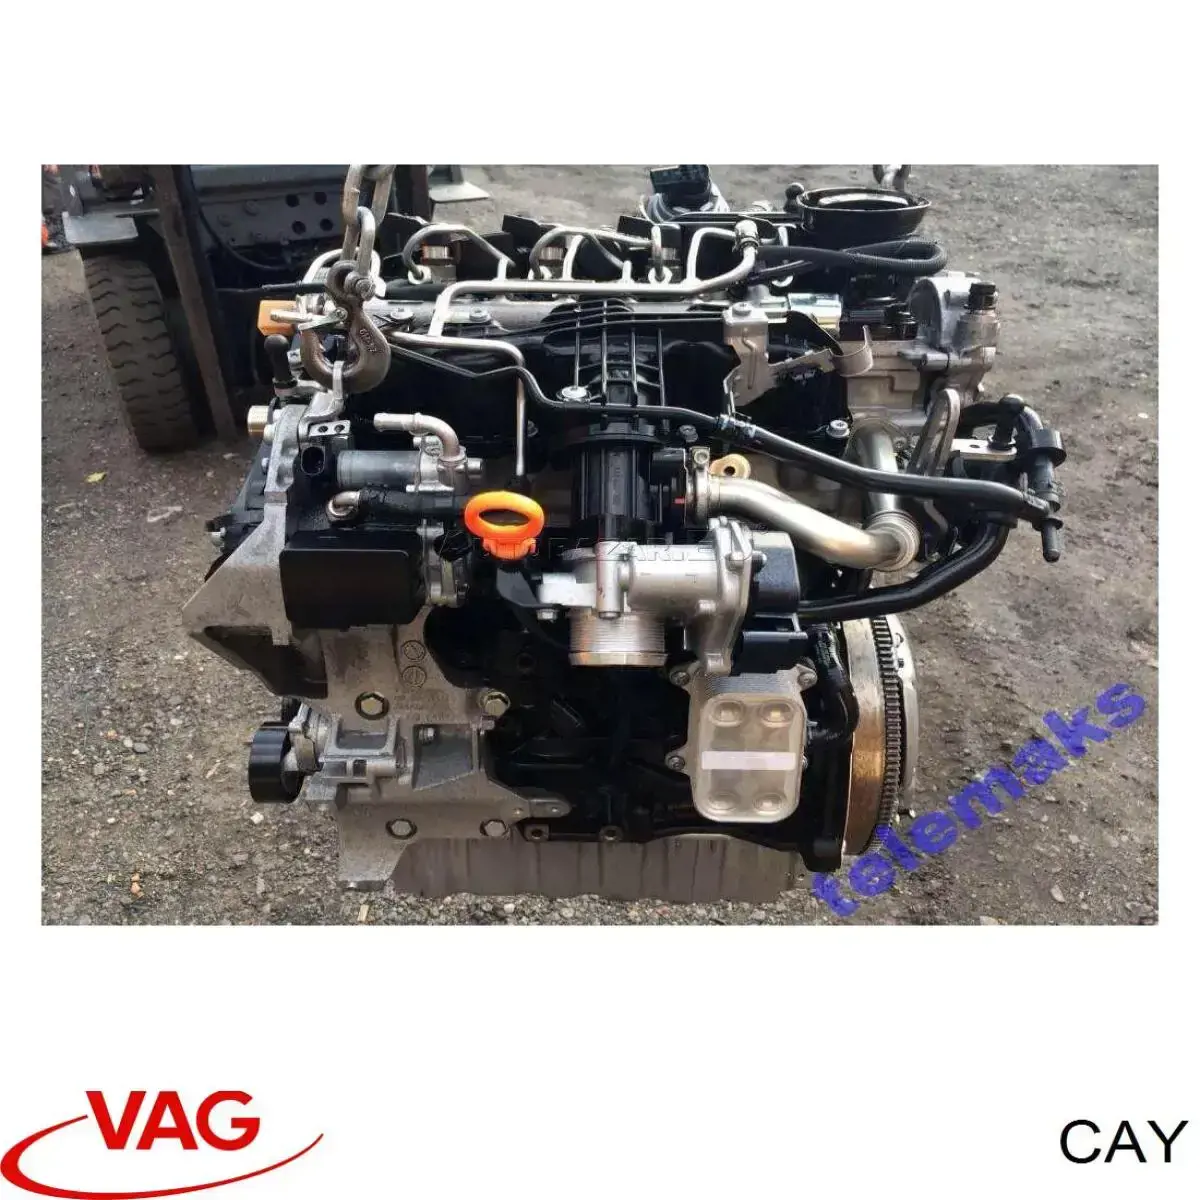 CAY VAG motor completo